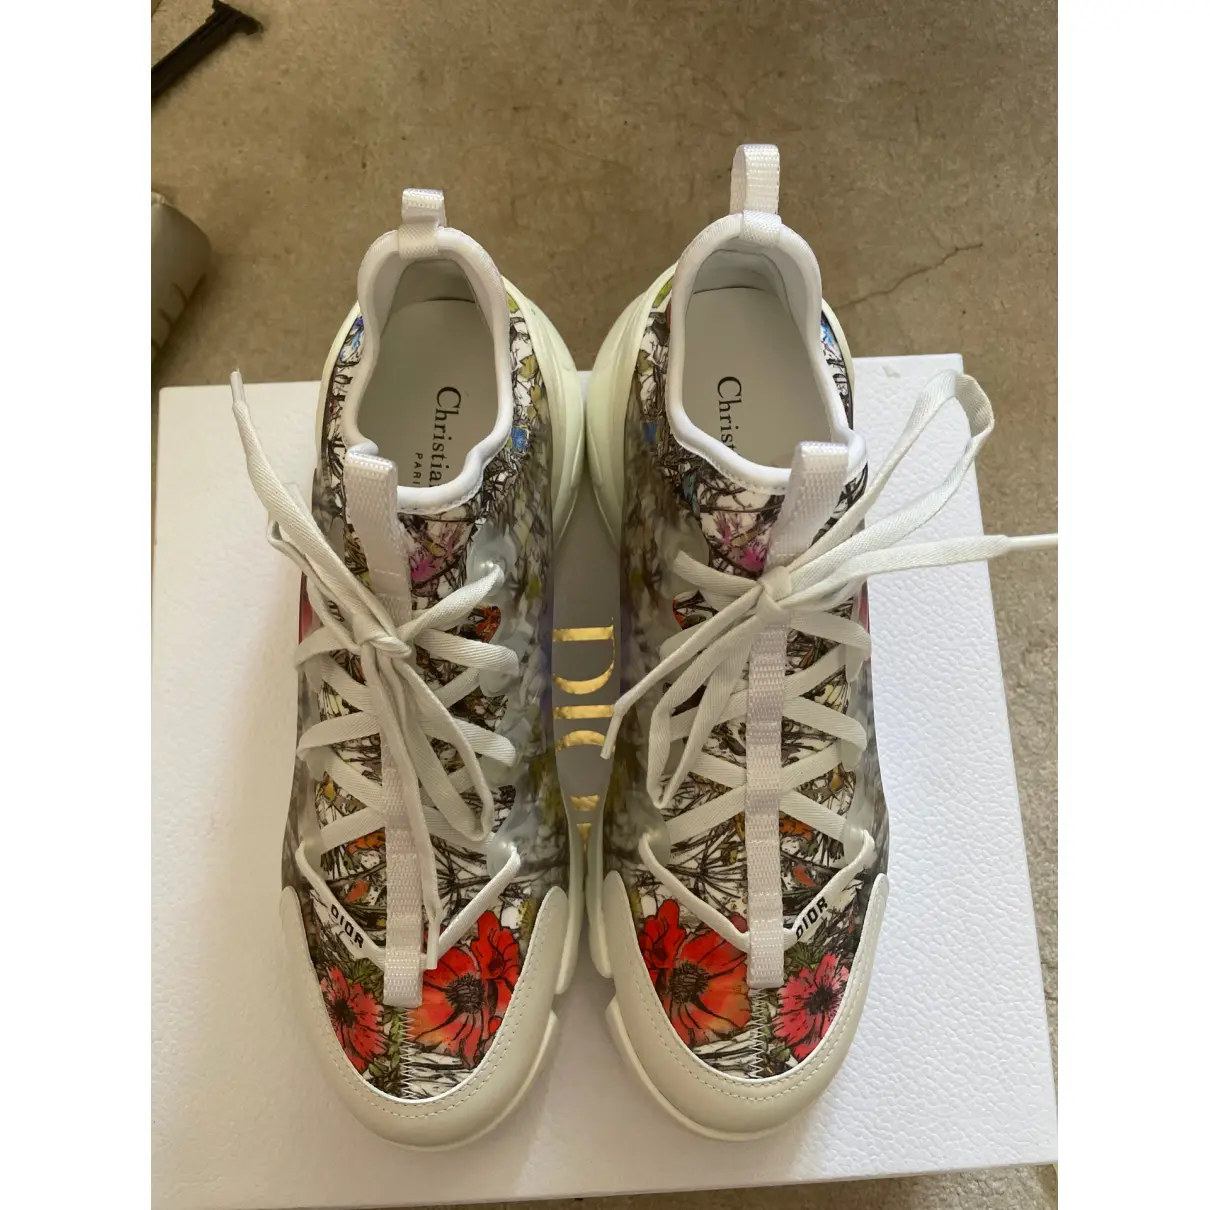 Buy Dior D-Connect leather trainers online